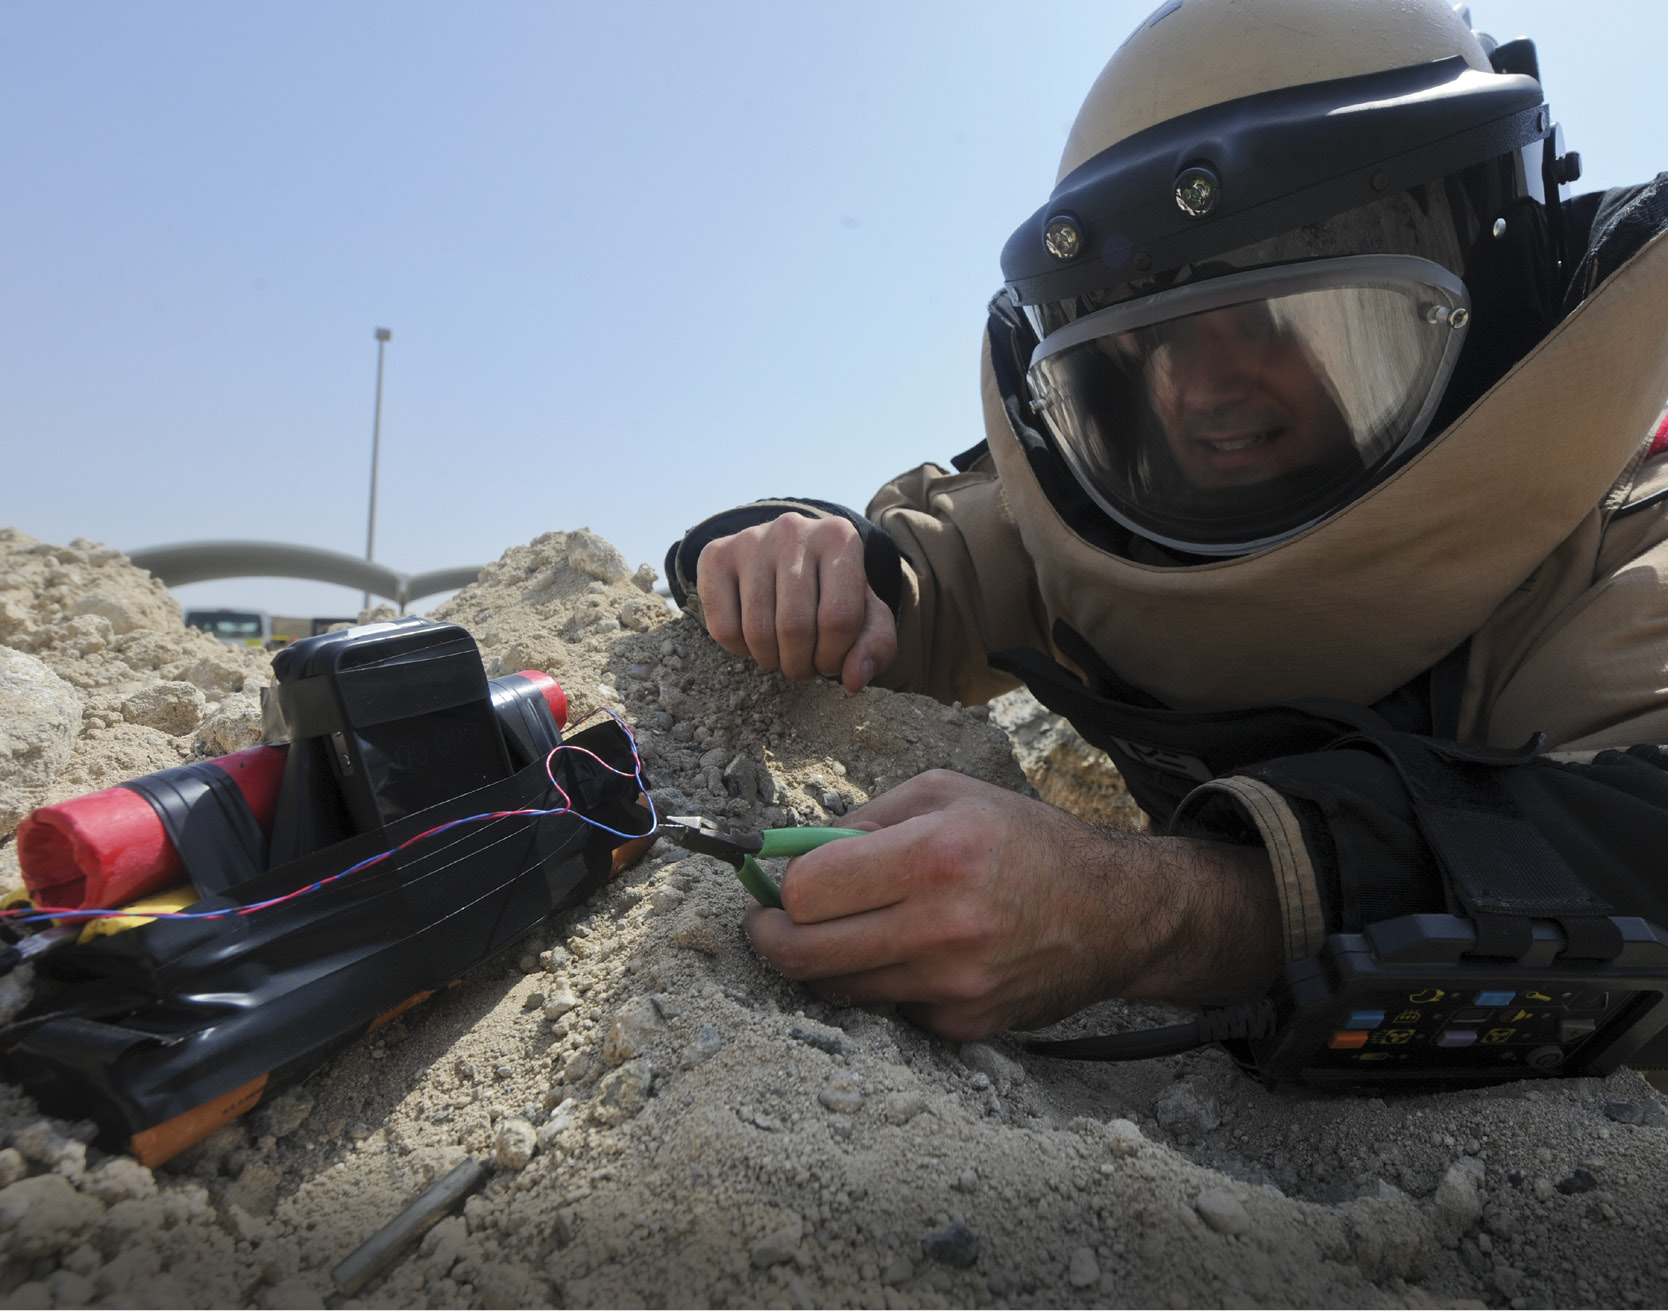 An explosive ordnance disposal worker diffuses a bomb